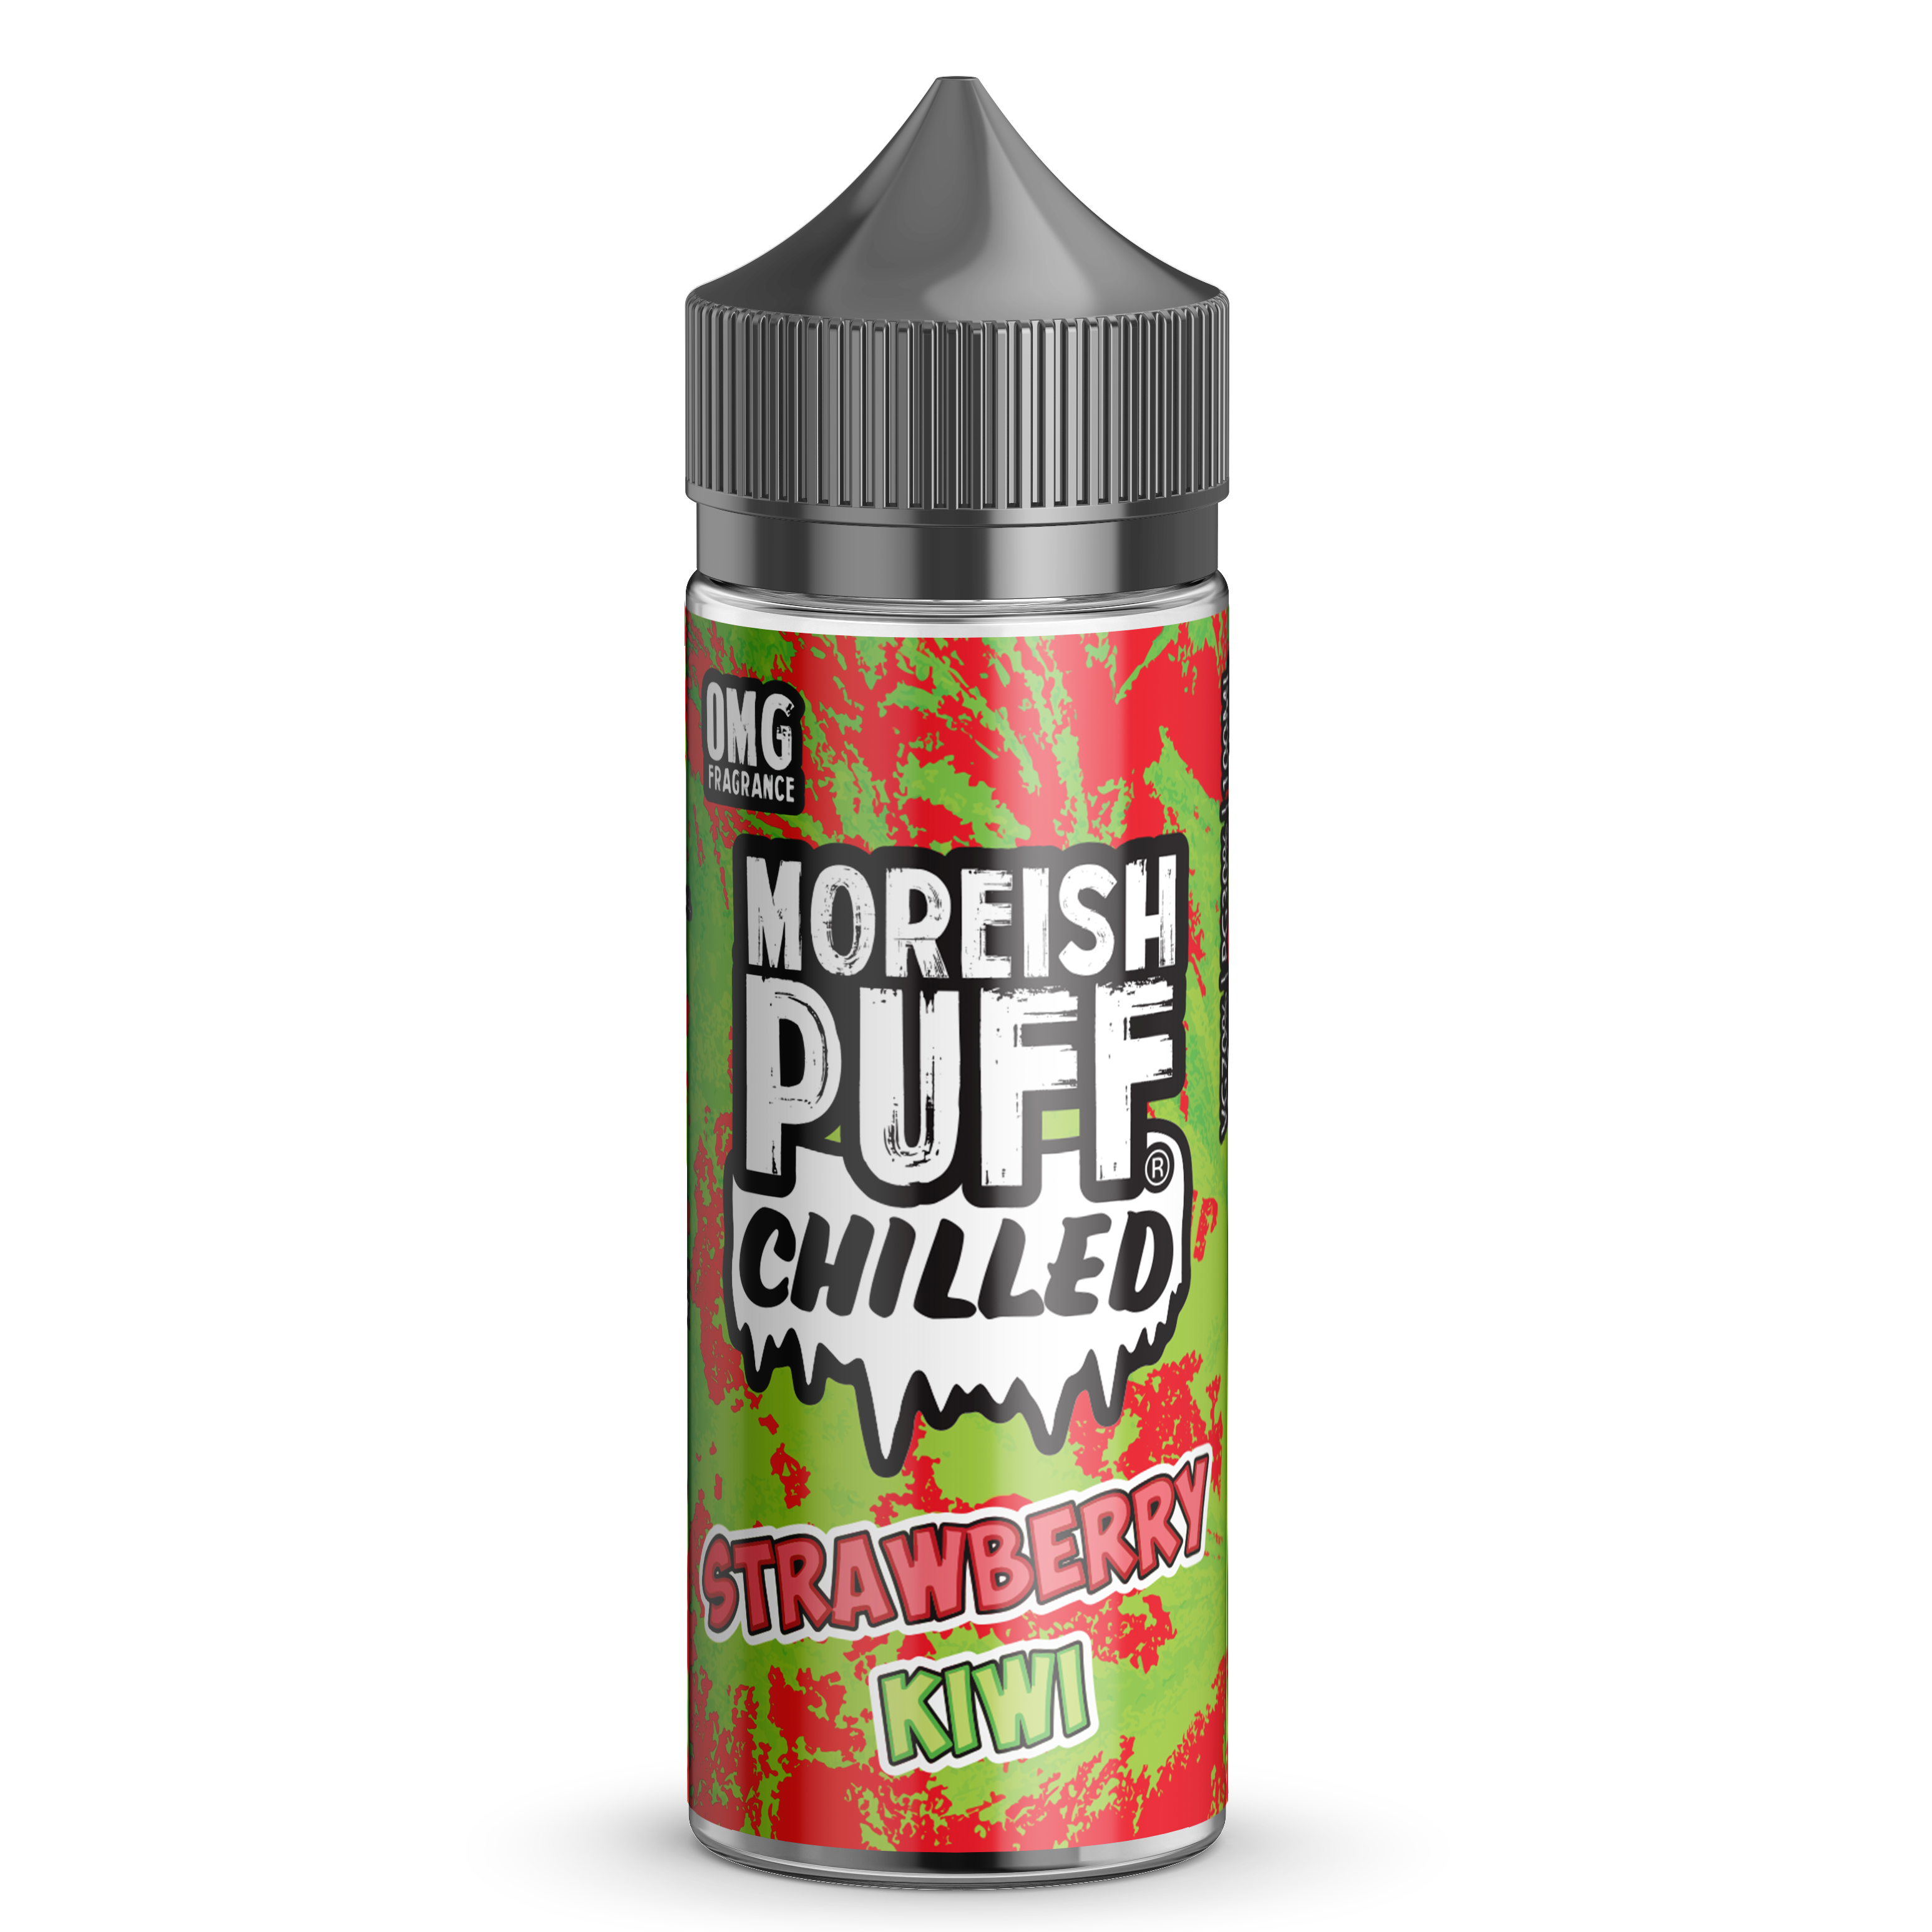 Strawberry and Kiwi Chilled E-liquid by Moreish Puff 100ml Short Fill